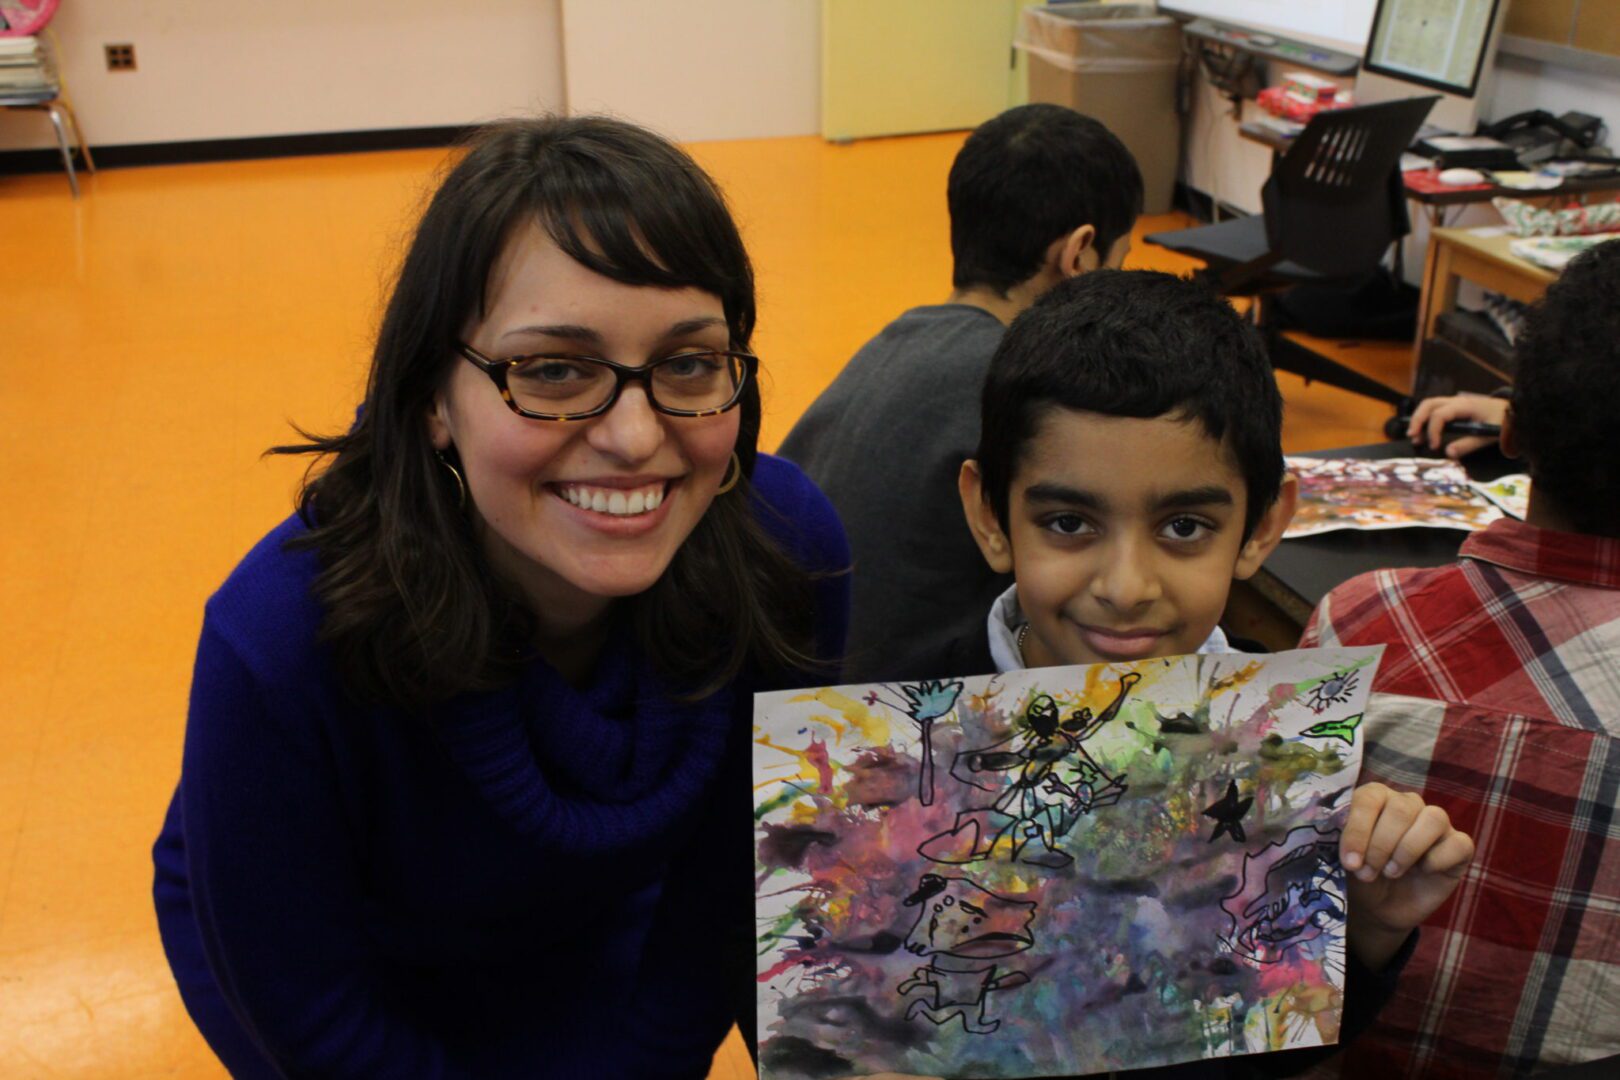 A woman holding a child's painting in a classroom.